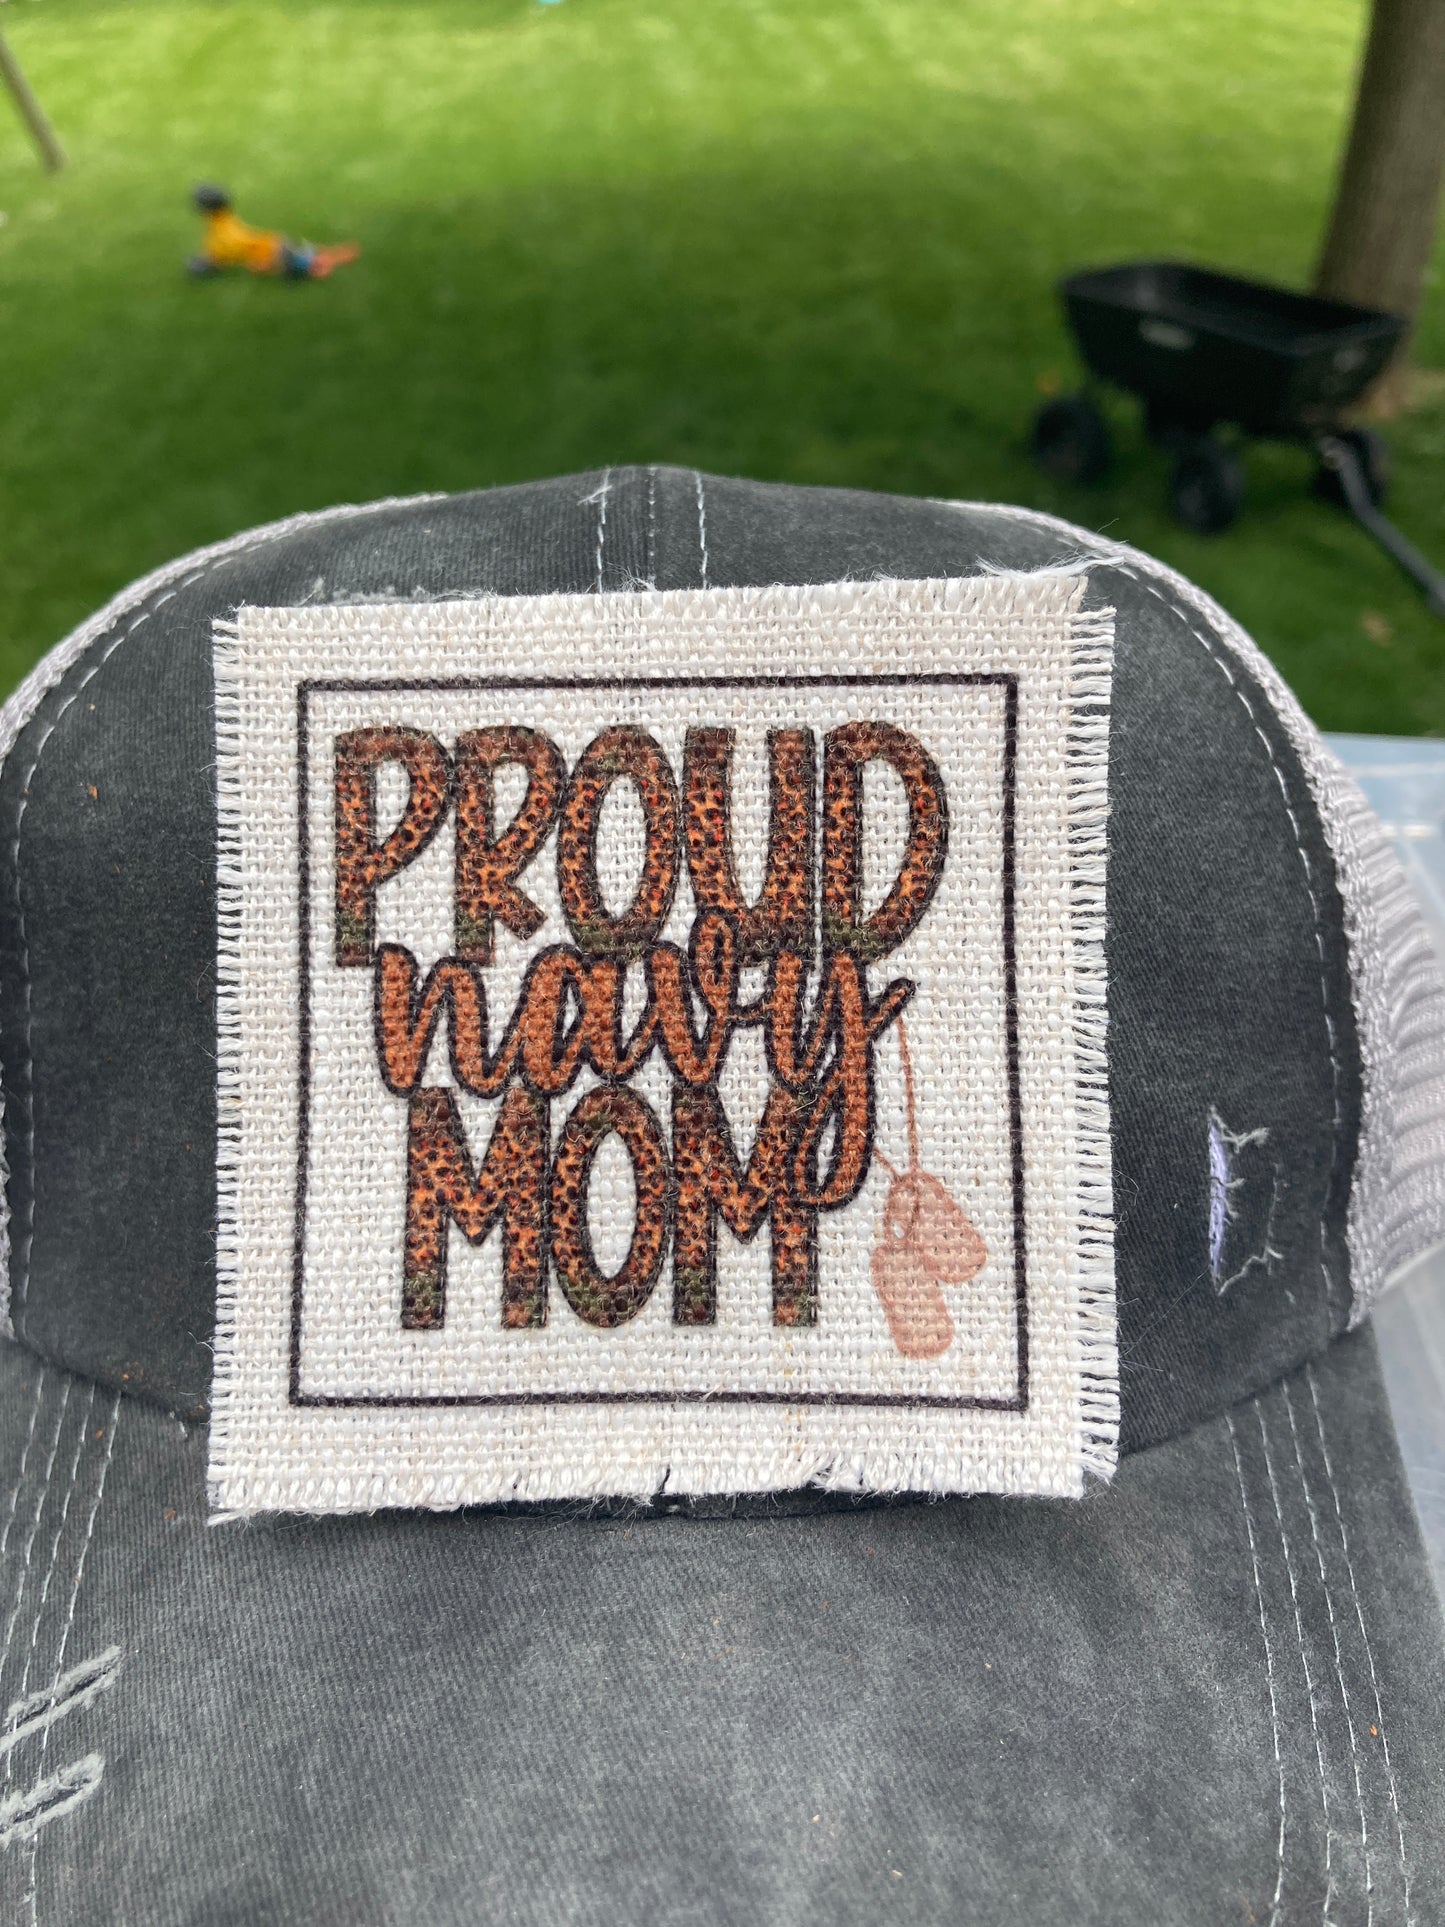 Proud Navy Mom Hat Patch